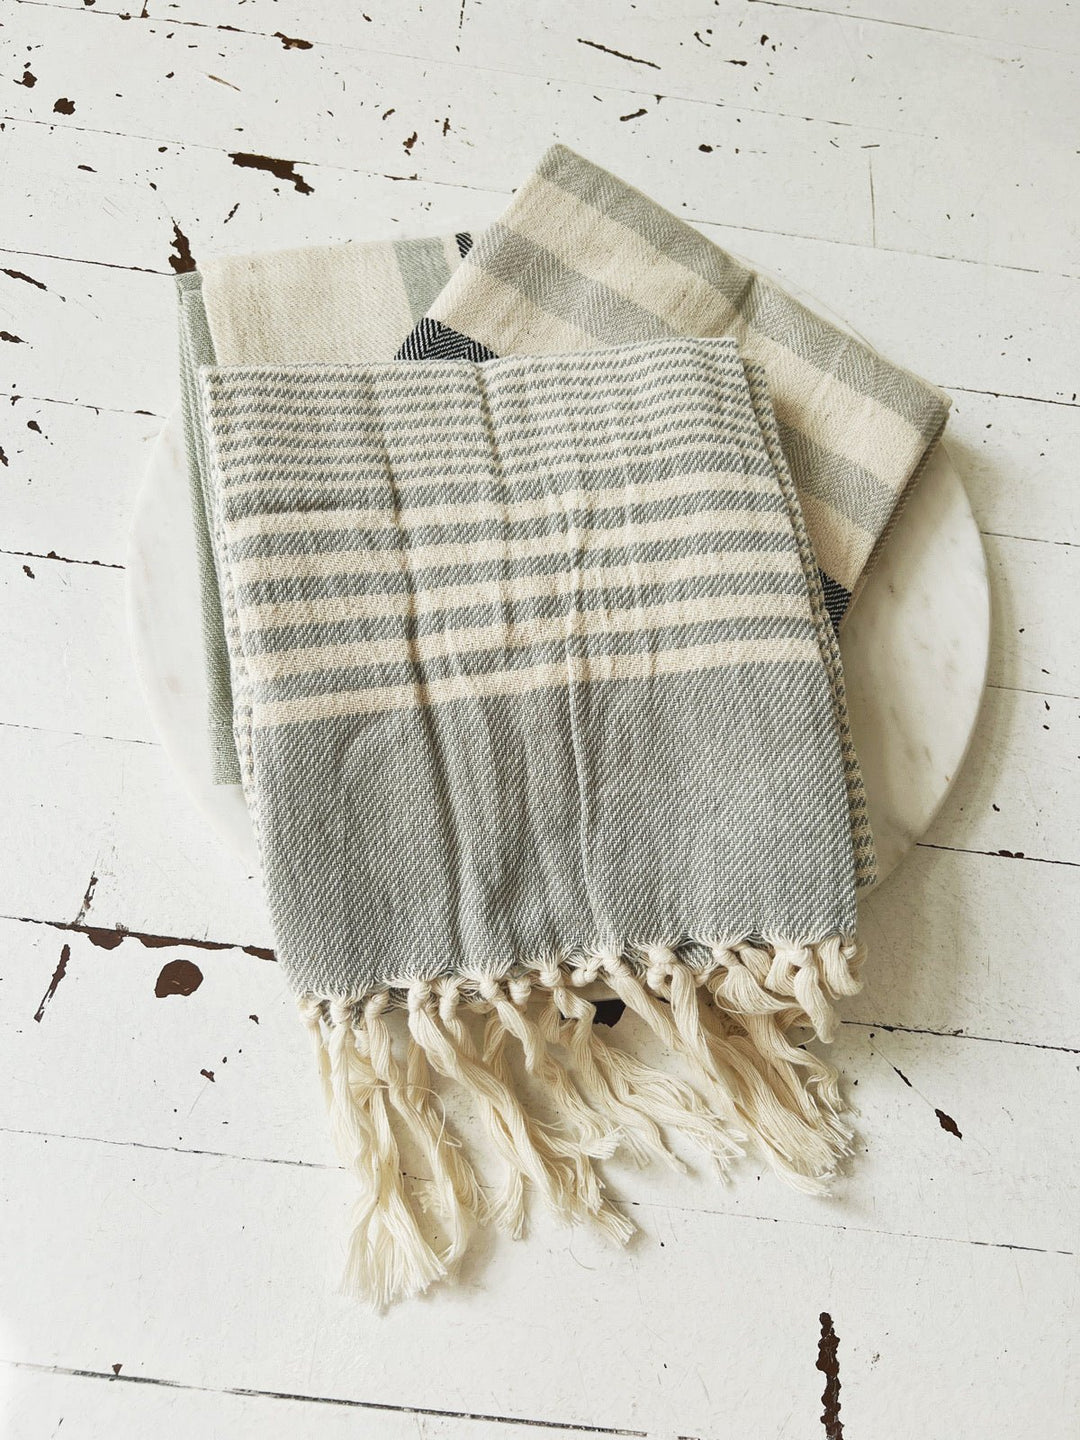 Creative Co-Op Woven Cotton Tea Towels with Stripes